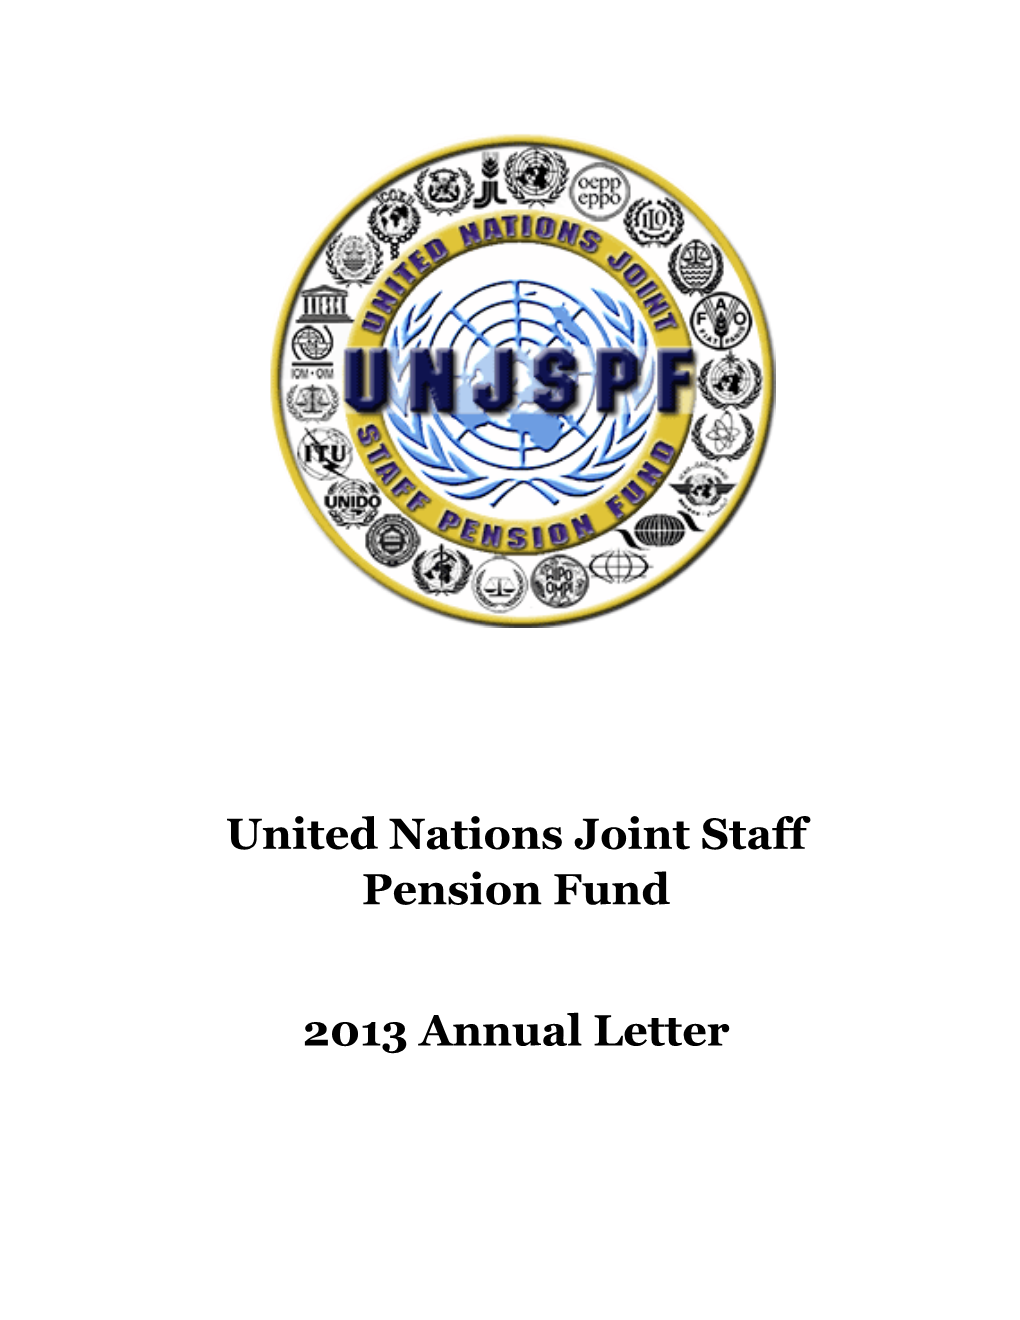 Annual Letter 2013